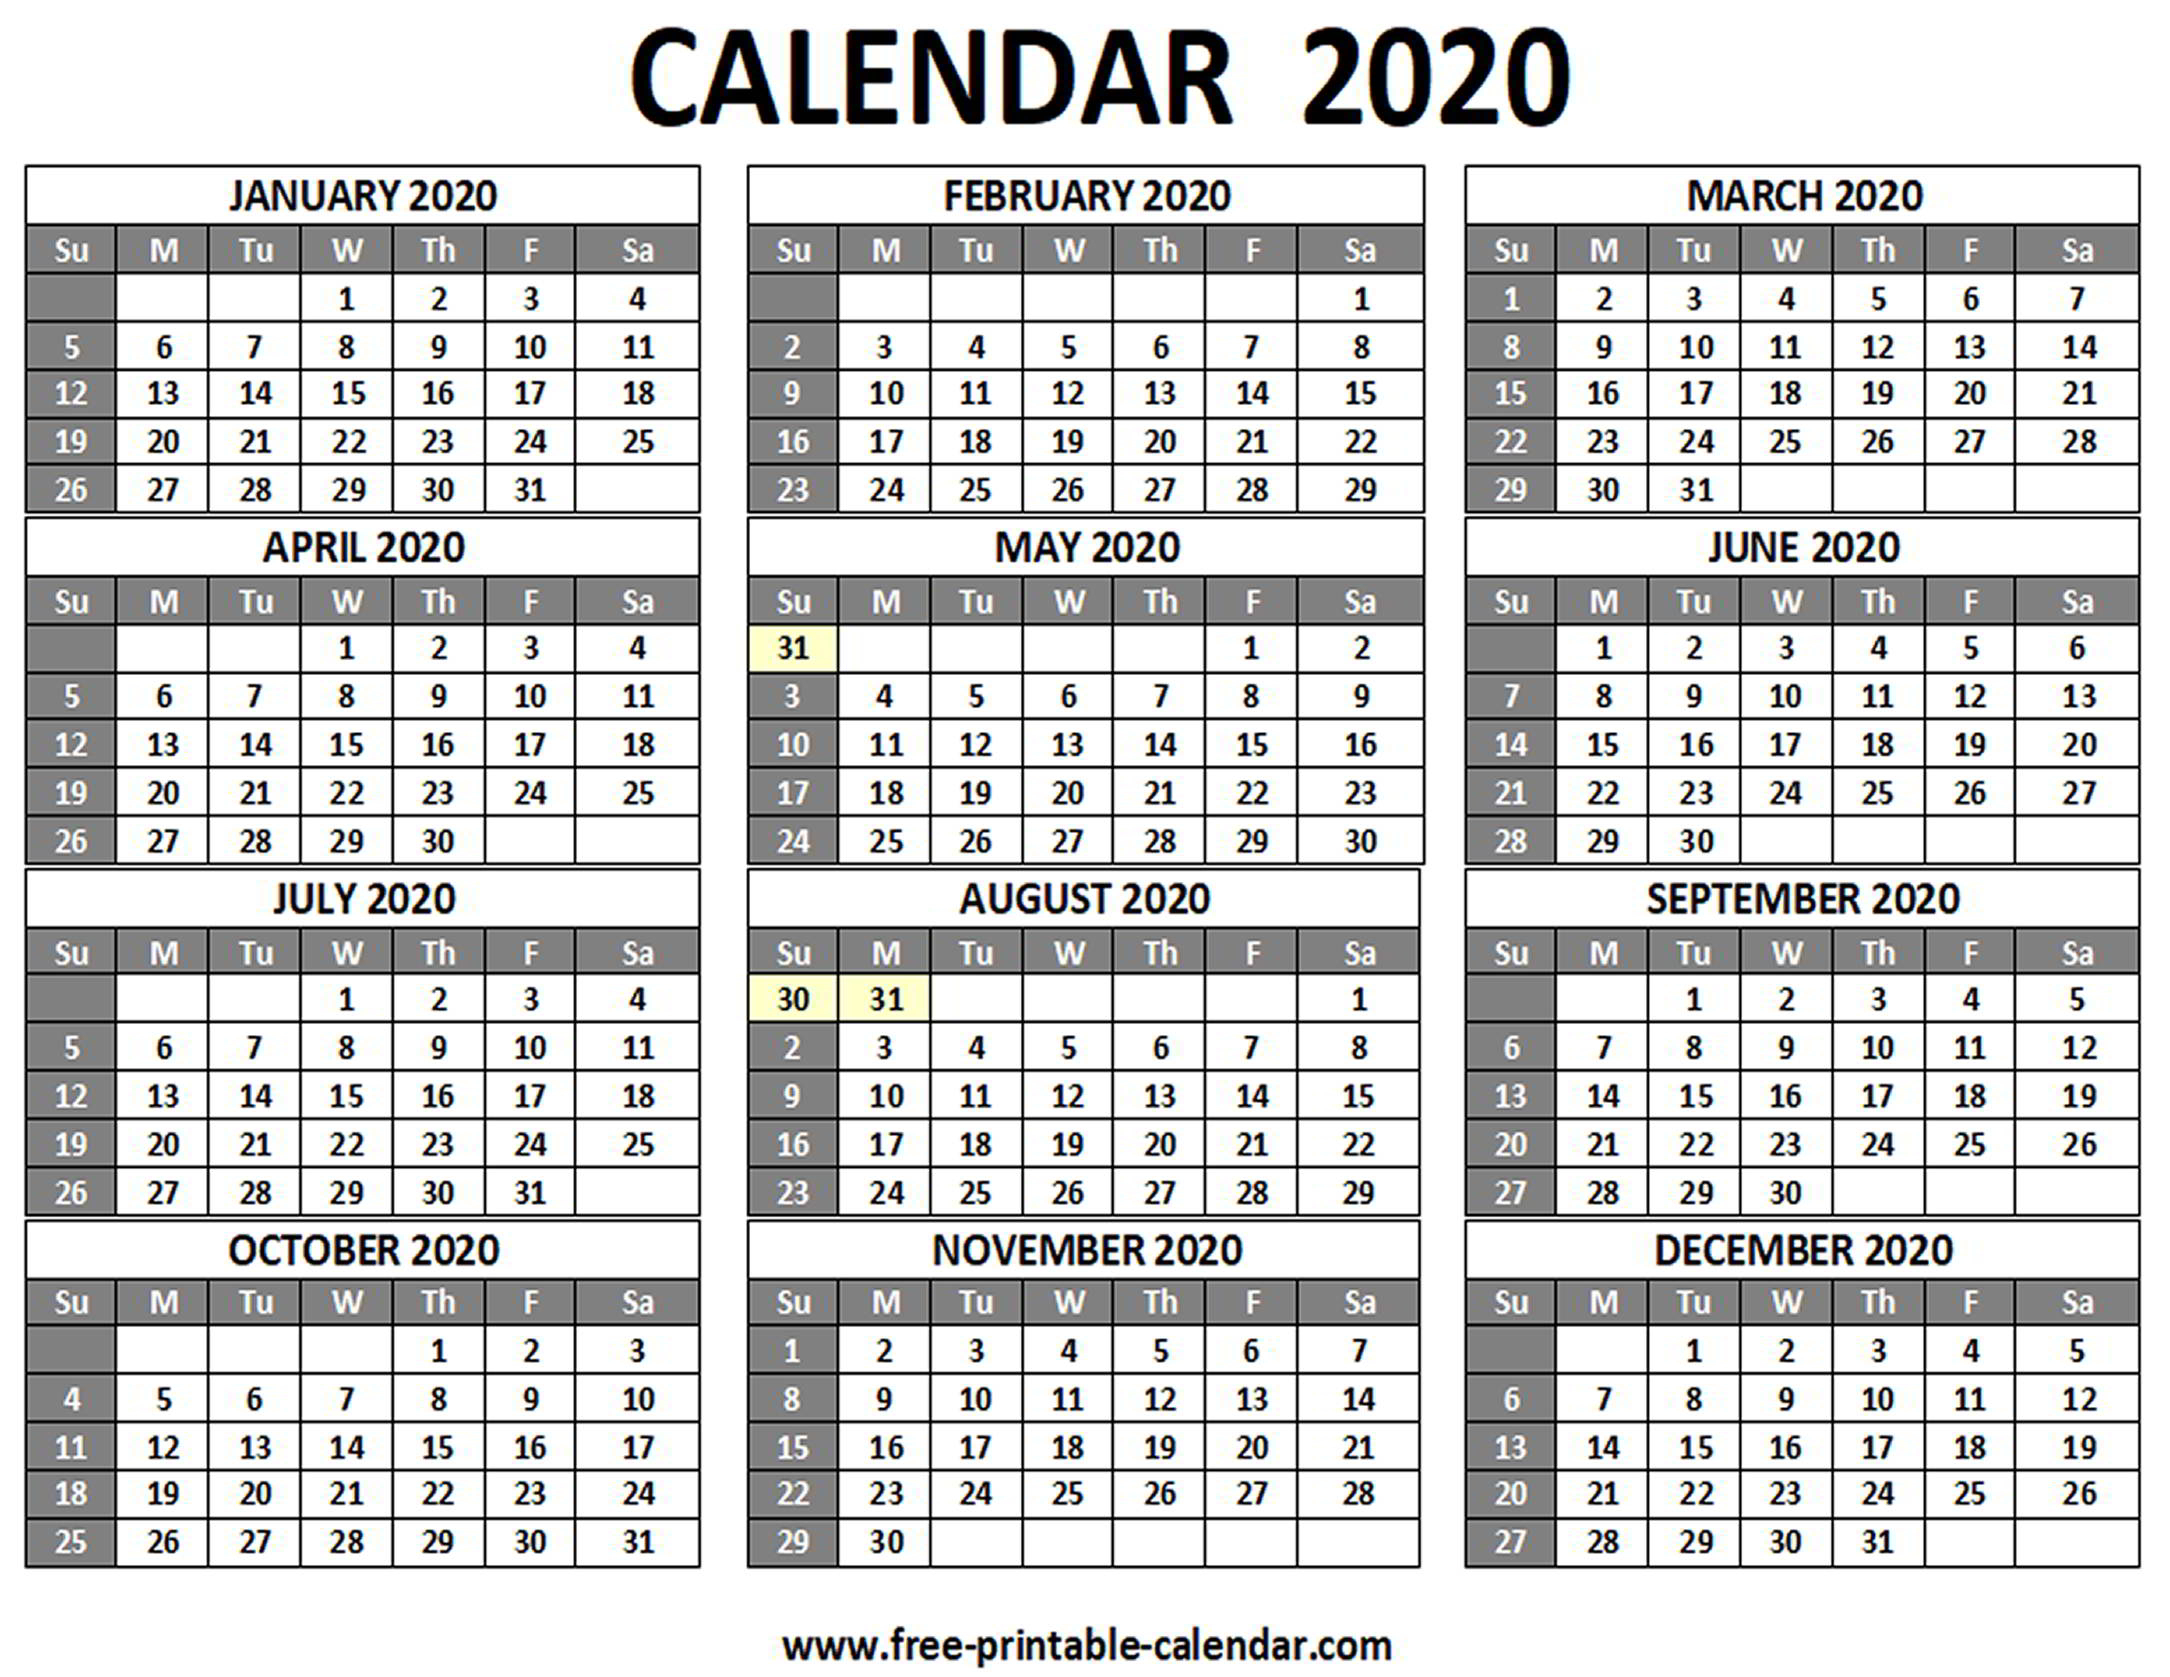 2020 12 Month Calendar On One Page - Wpa.wpart.co